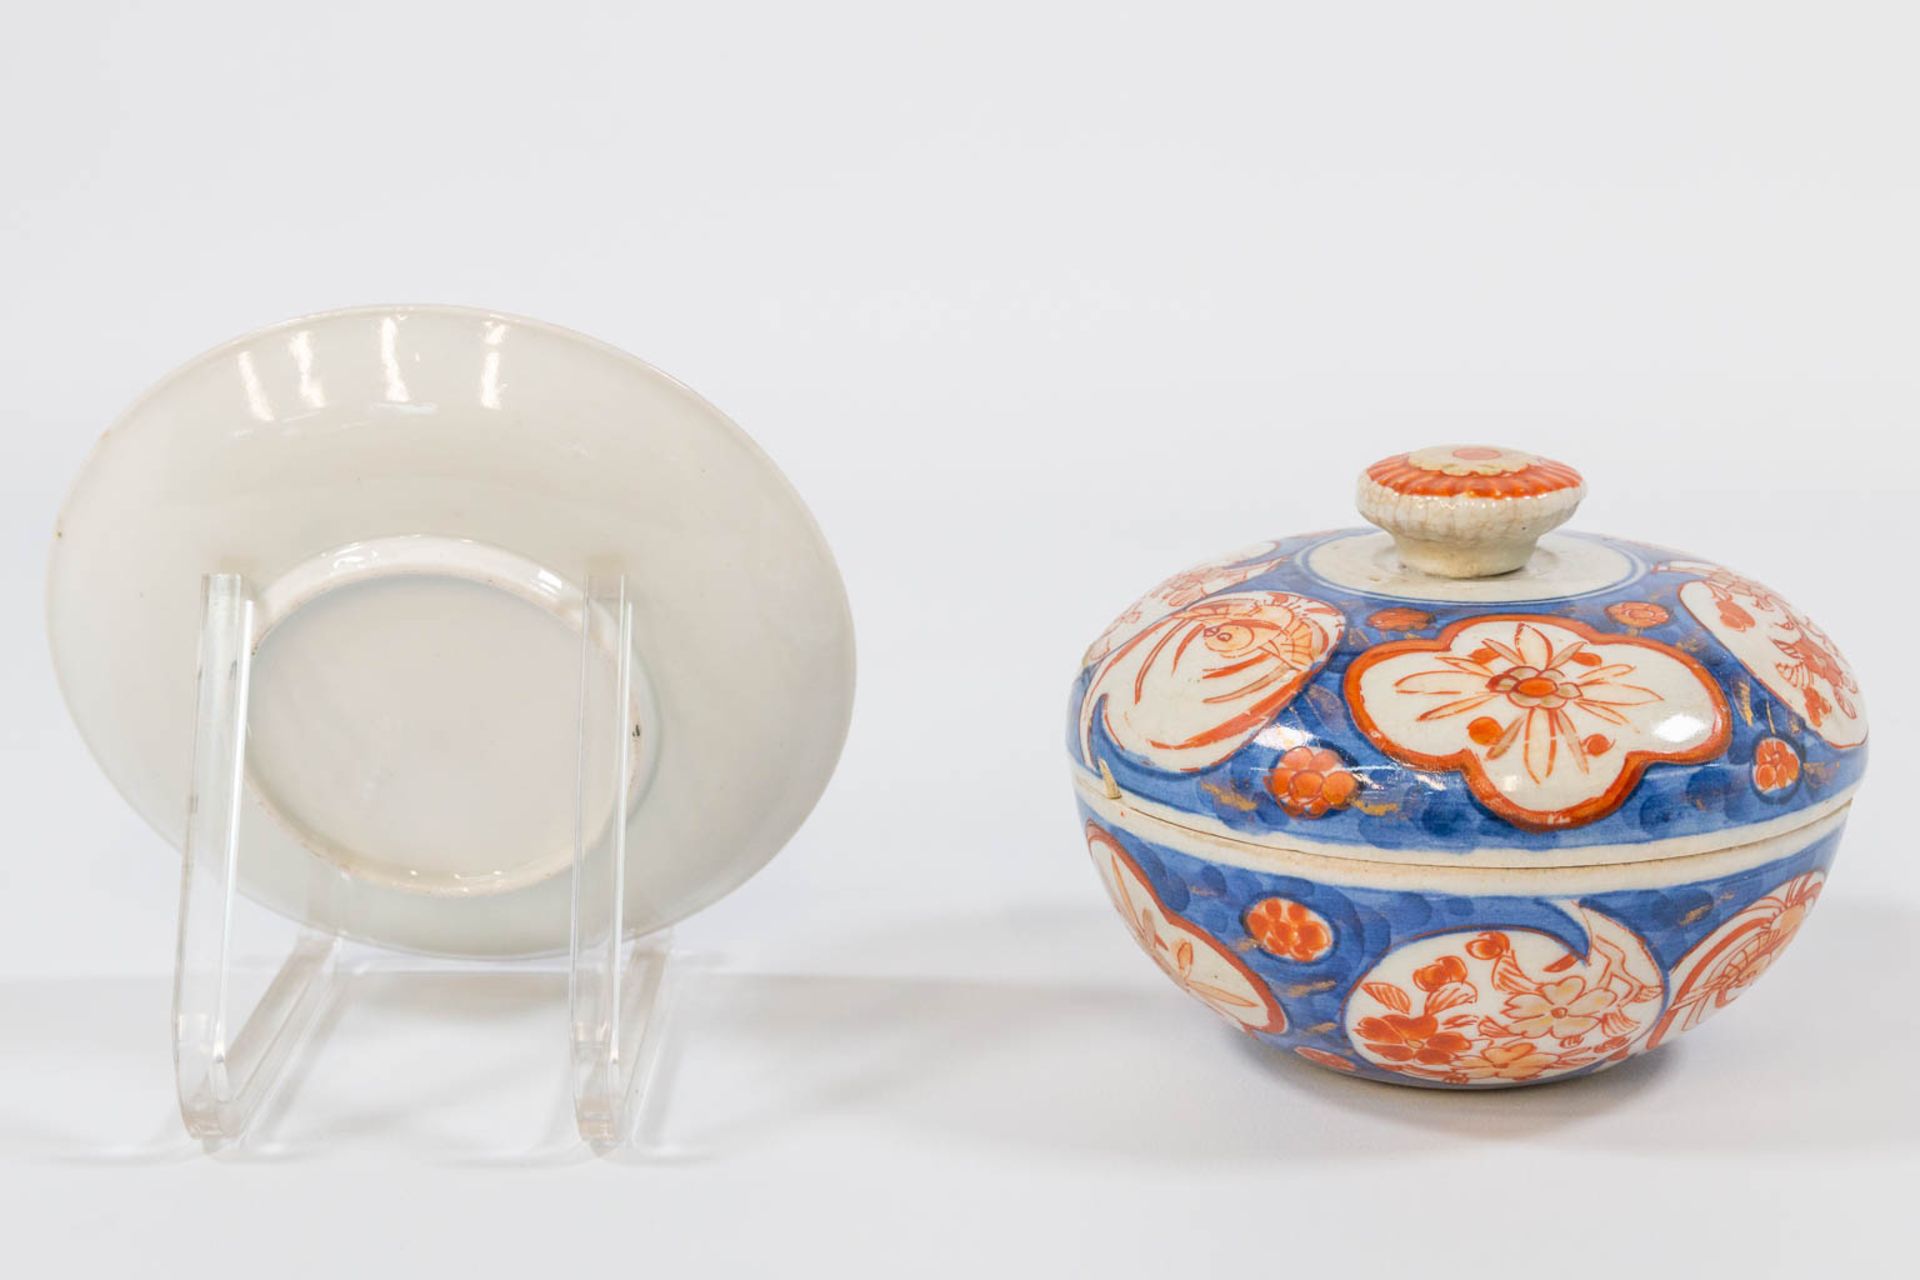 A collection of 6 famille rose objects and plates, made of porcelain. - Image 8 of 24